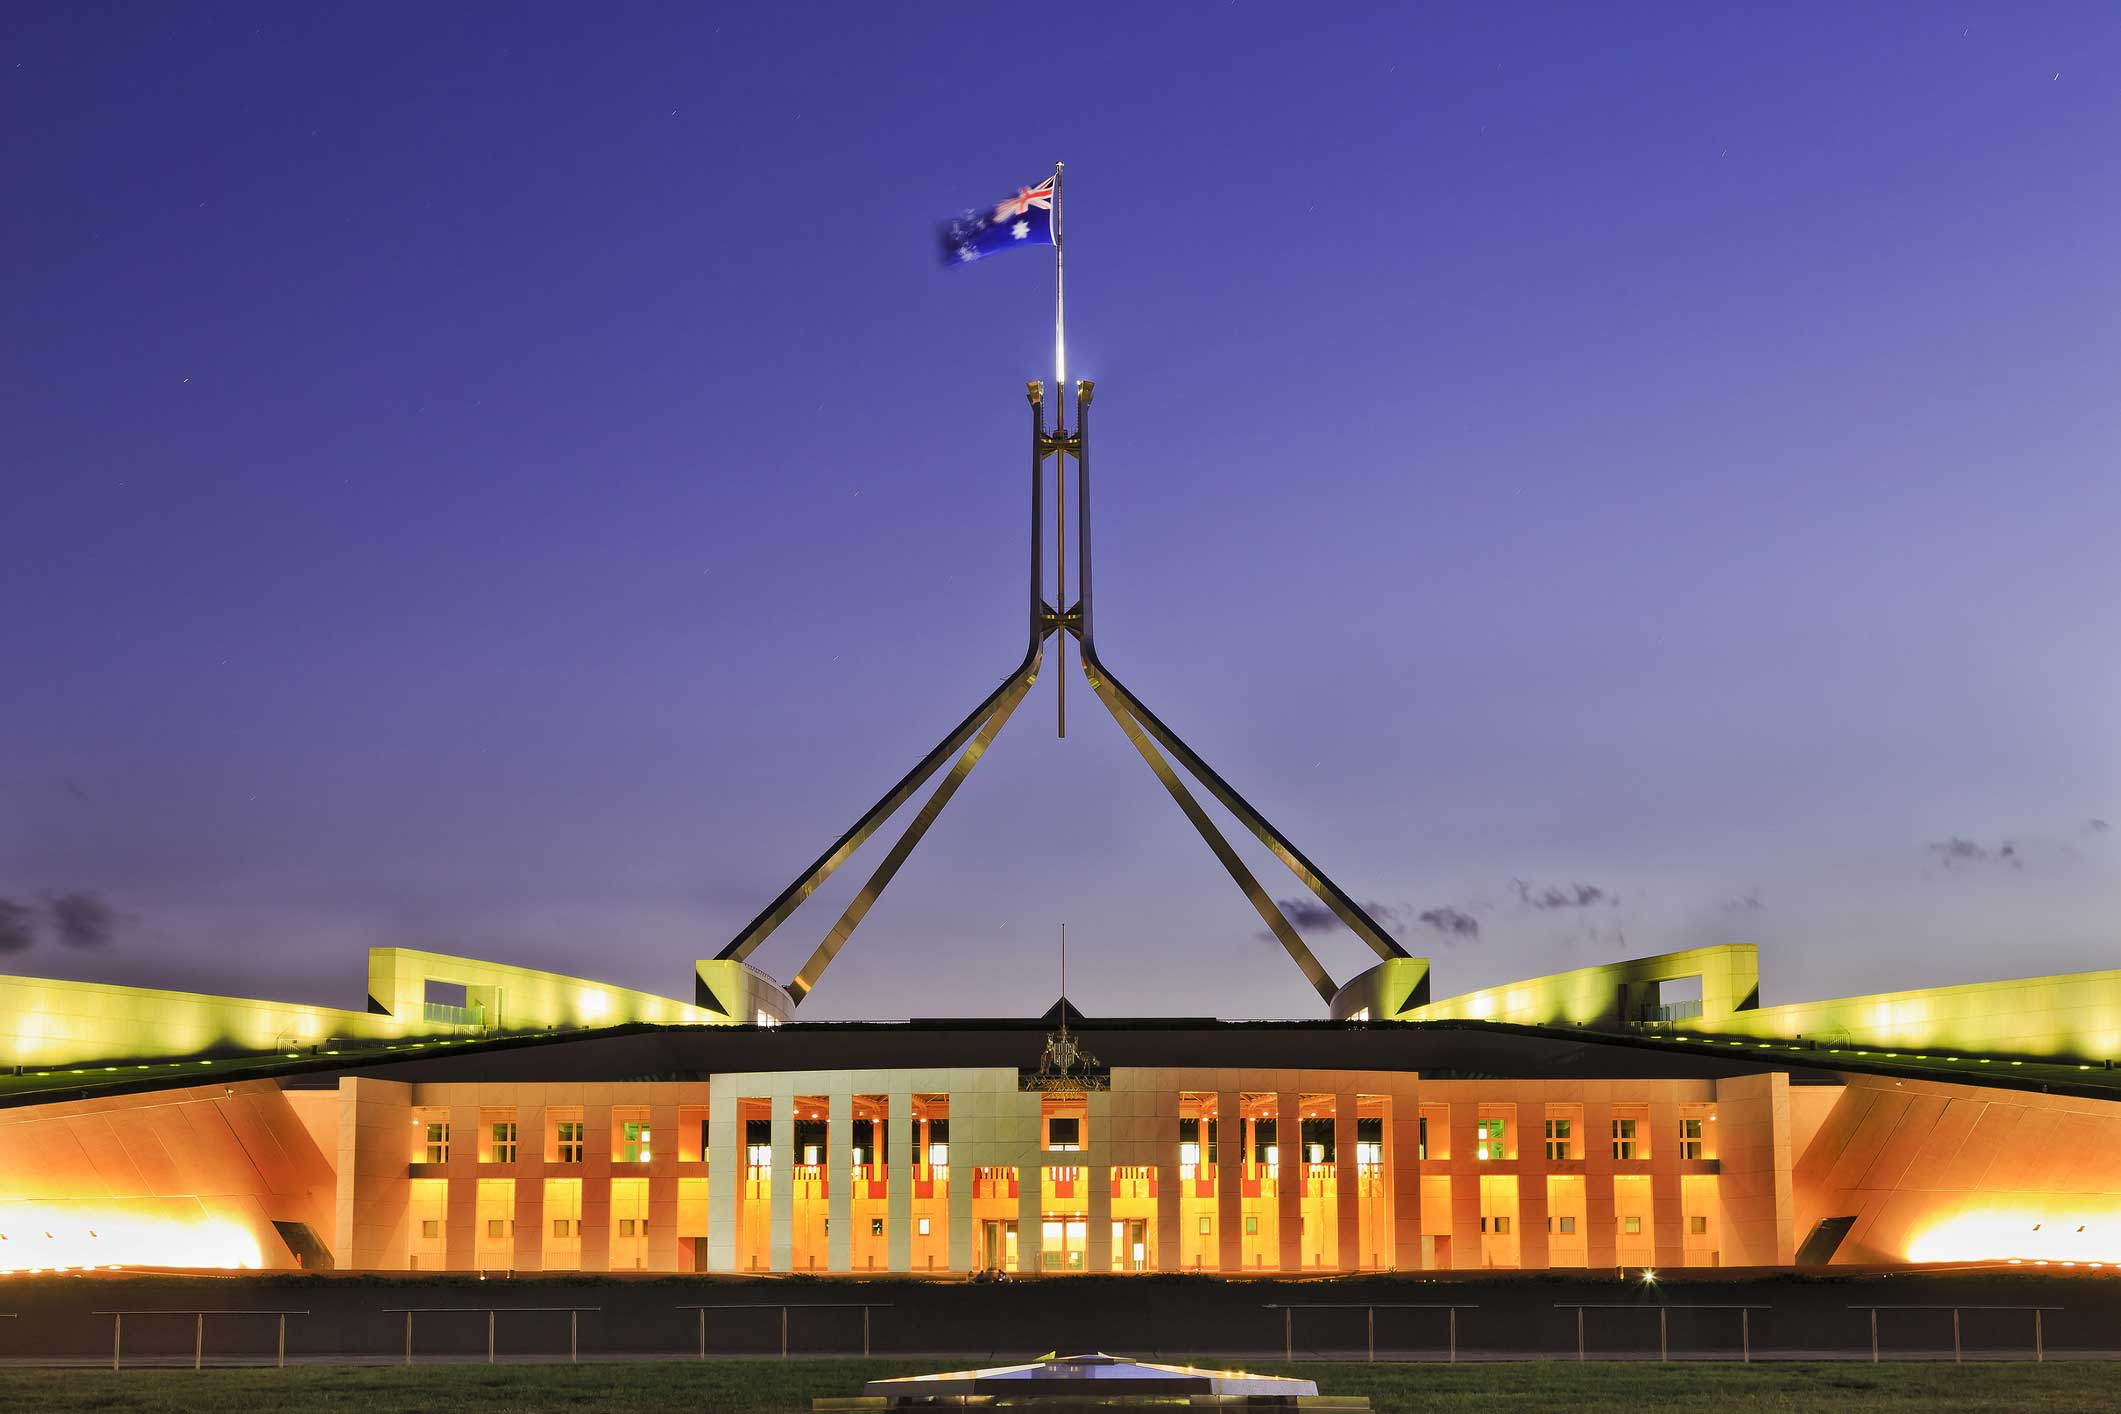 An image of the Australian Parliament House